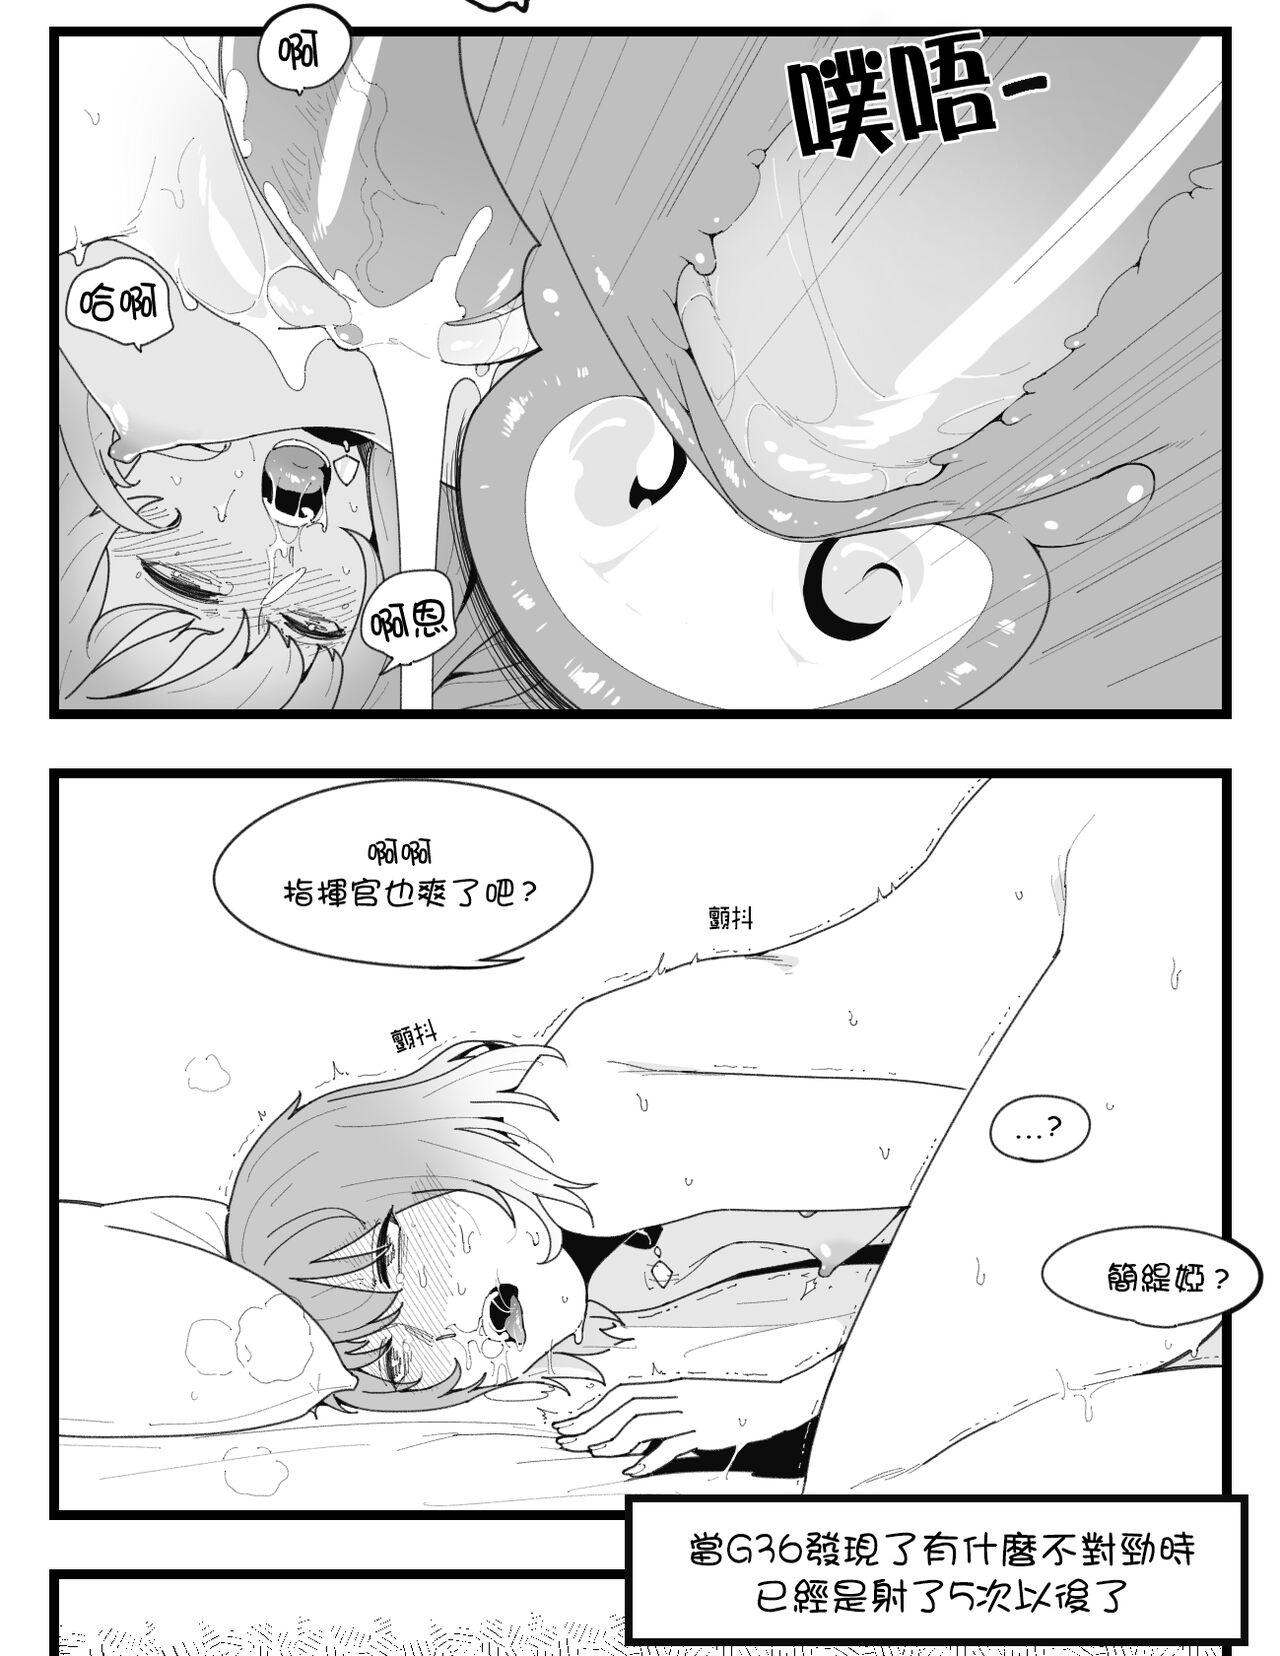 Girl Get Fuck Gentiane x G36 part1~3 - Girls frontline Gay Rimming - Page 9